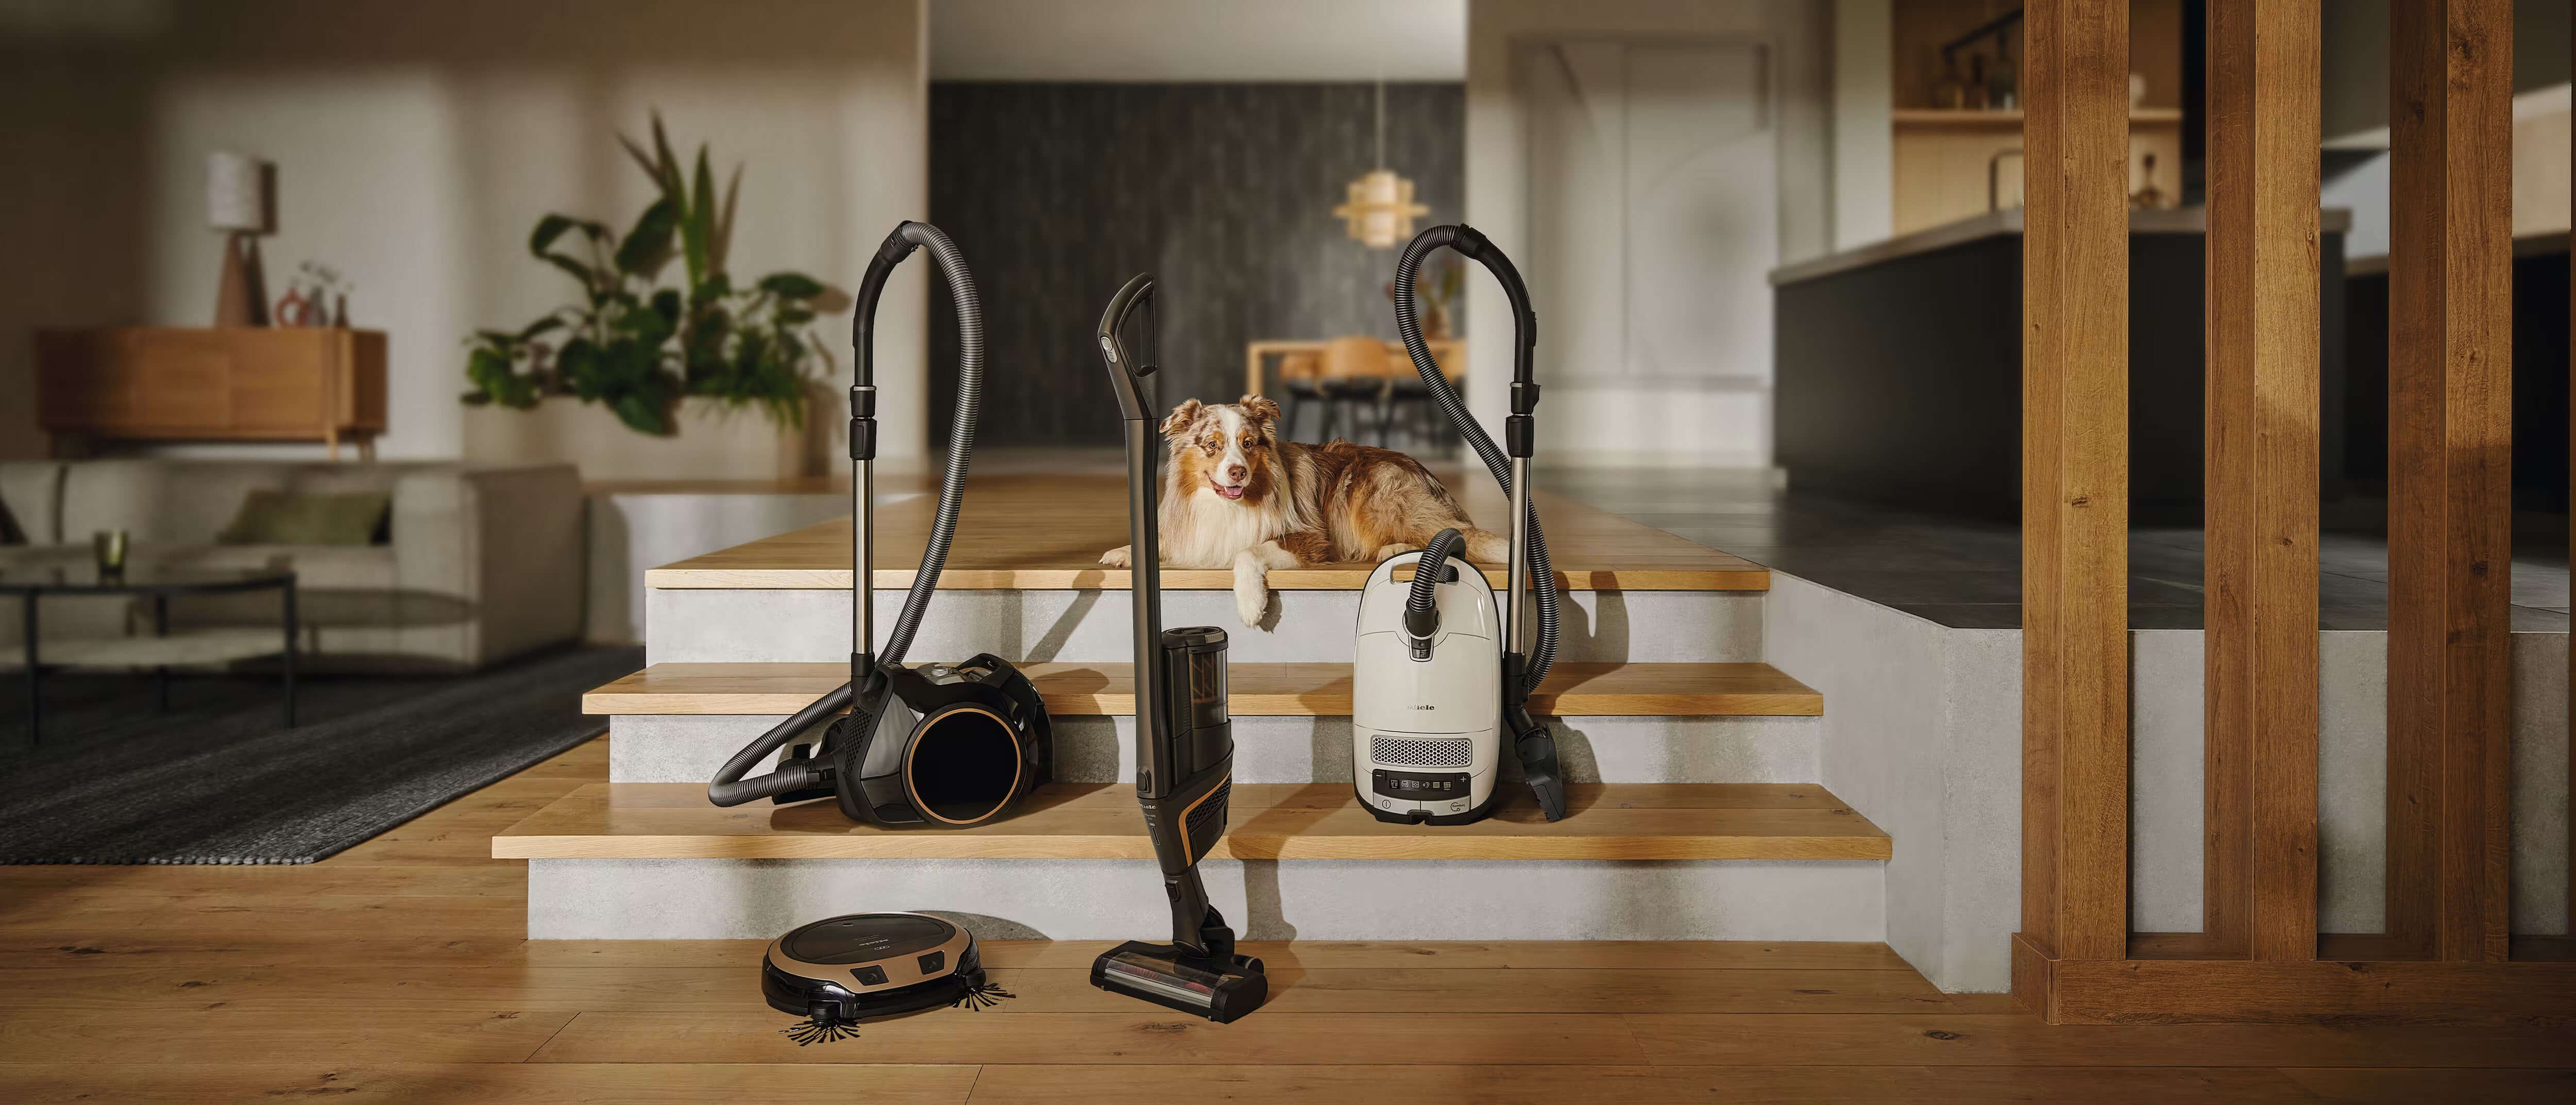 Why We've Recommended Miele Vacuums for Almost a Decade.